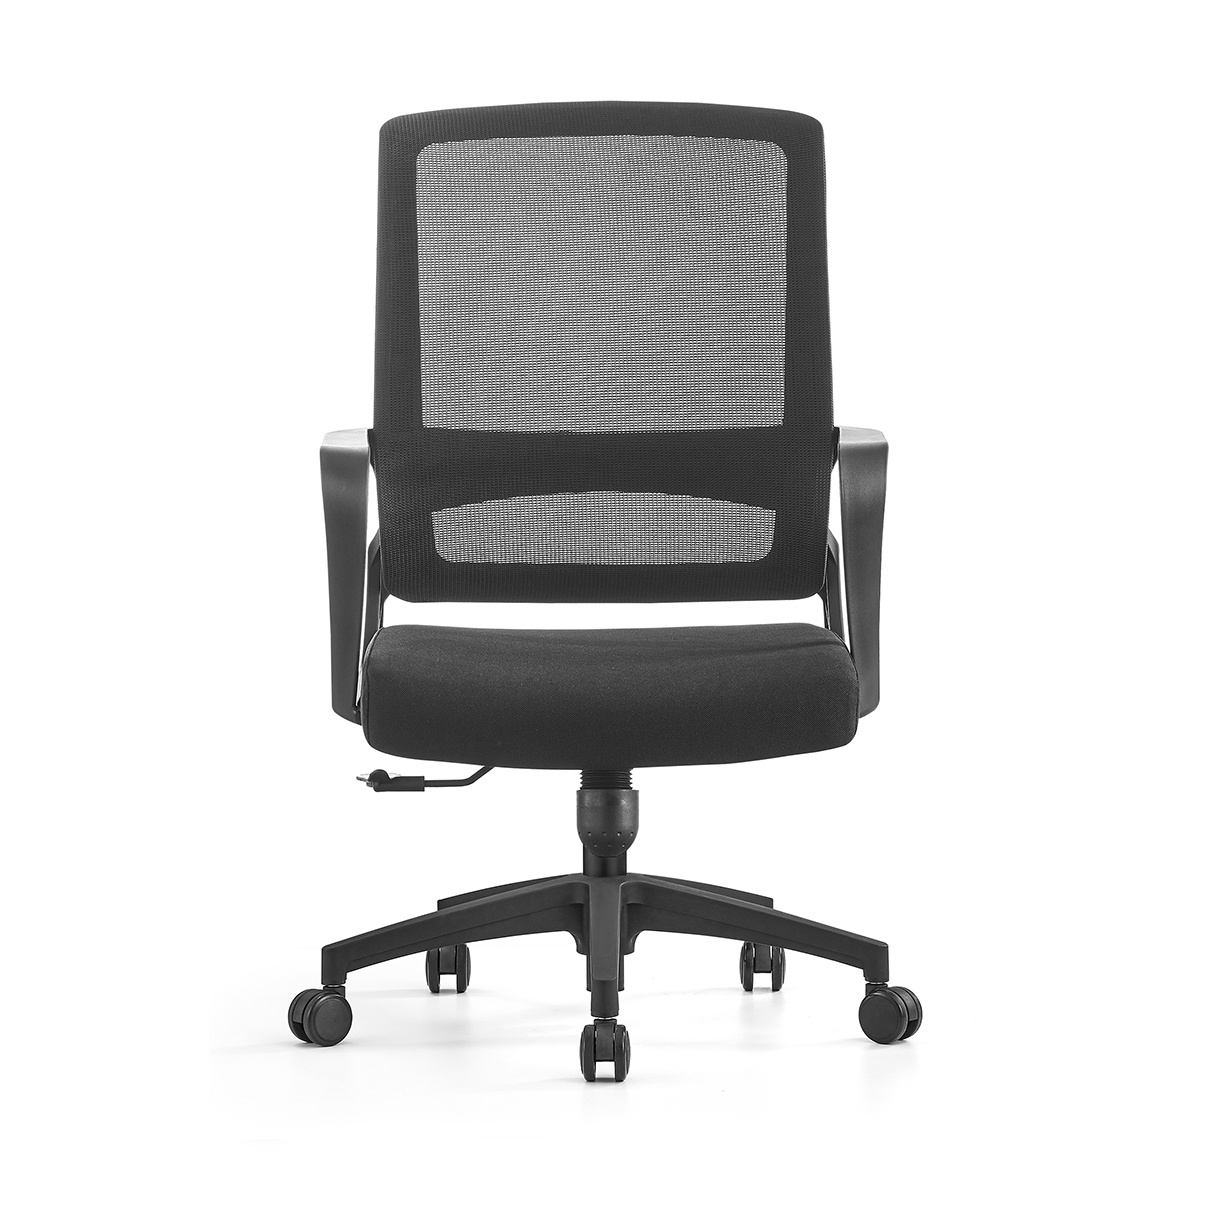 The Best Desk Chairs According To Gamers | HuffPost Life